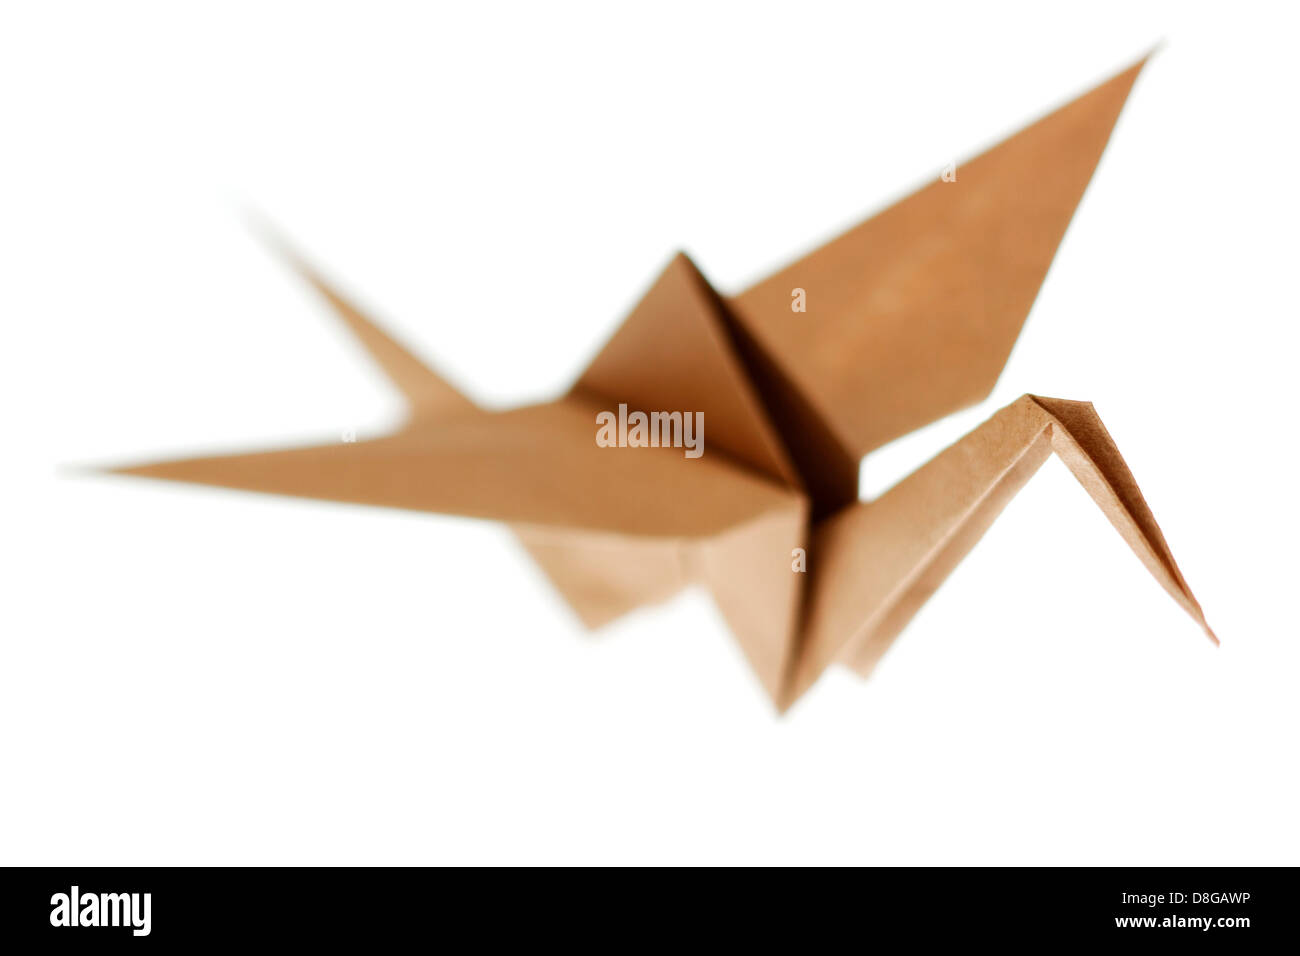 Origami crane bird made from brown recycle paper. Isolated on white background Stock Photo